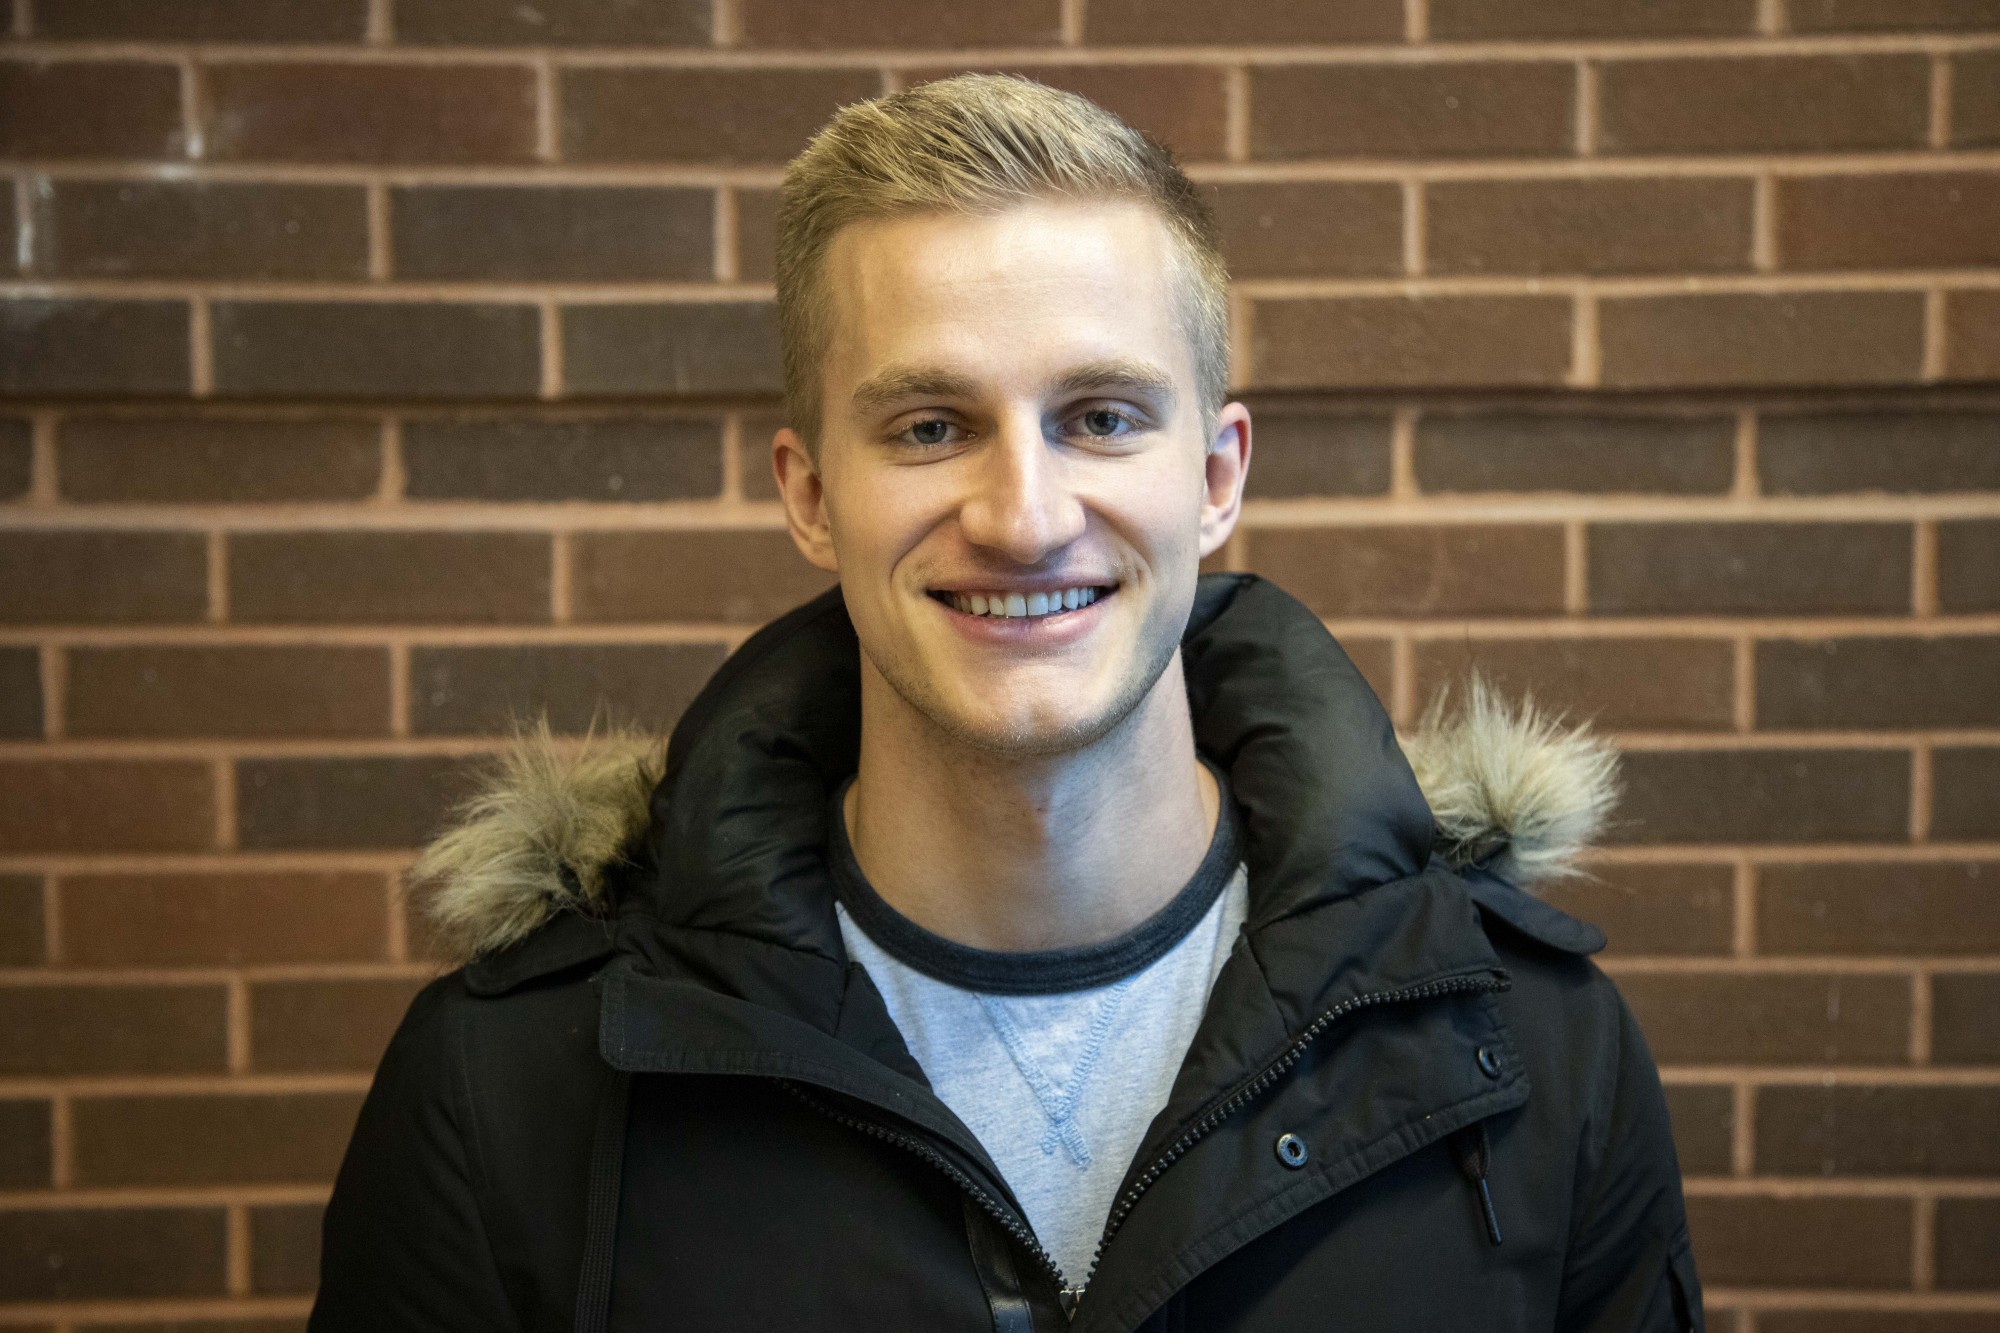 Jackson Baril poses for a portrait in the Carlson School of Management on Tuesday, Dec. 3. 